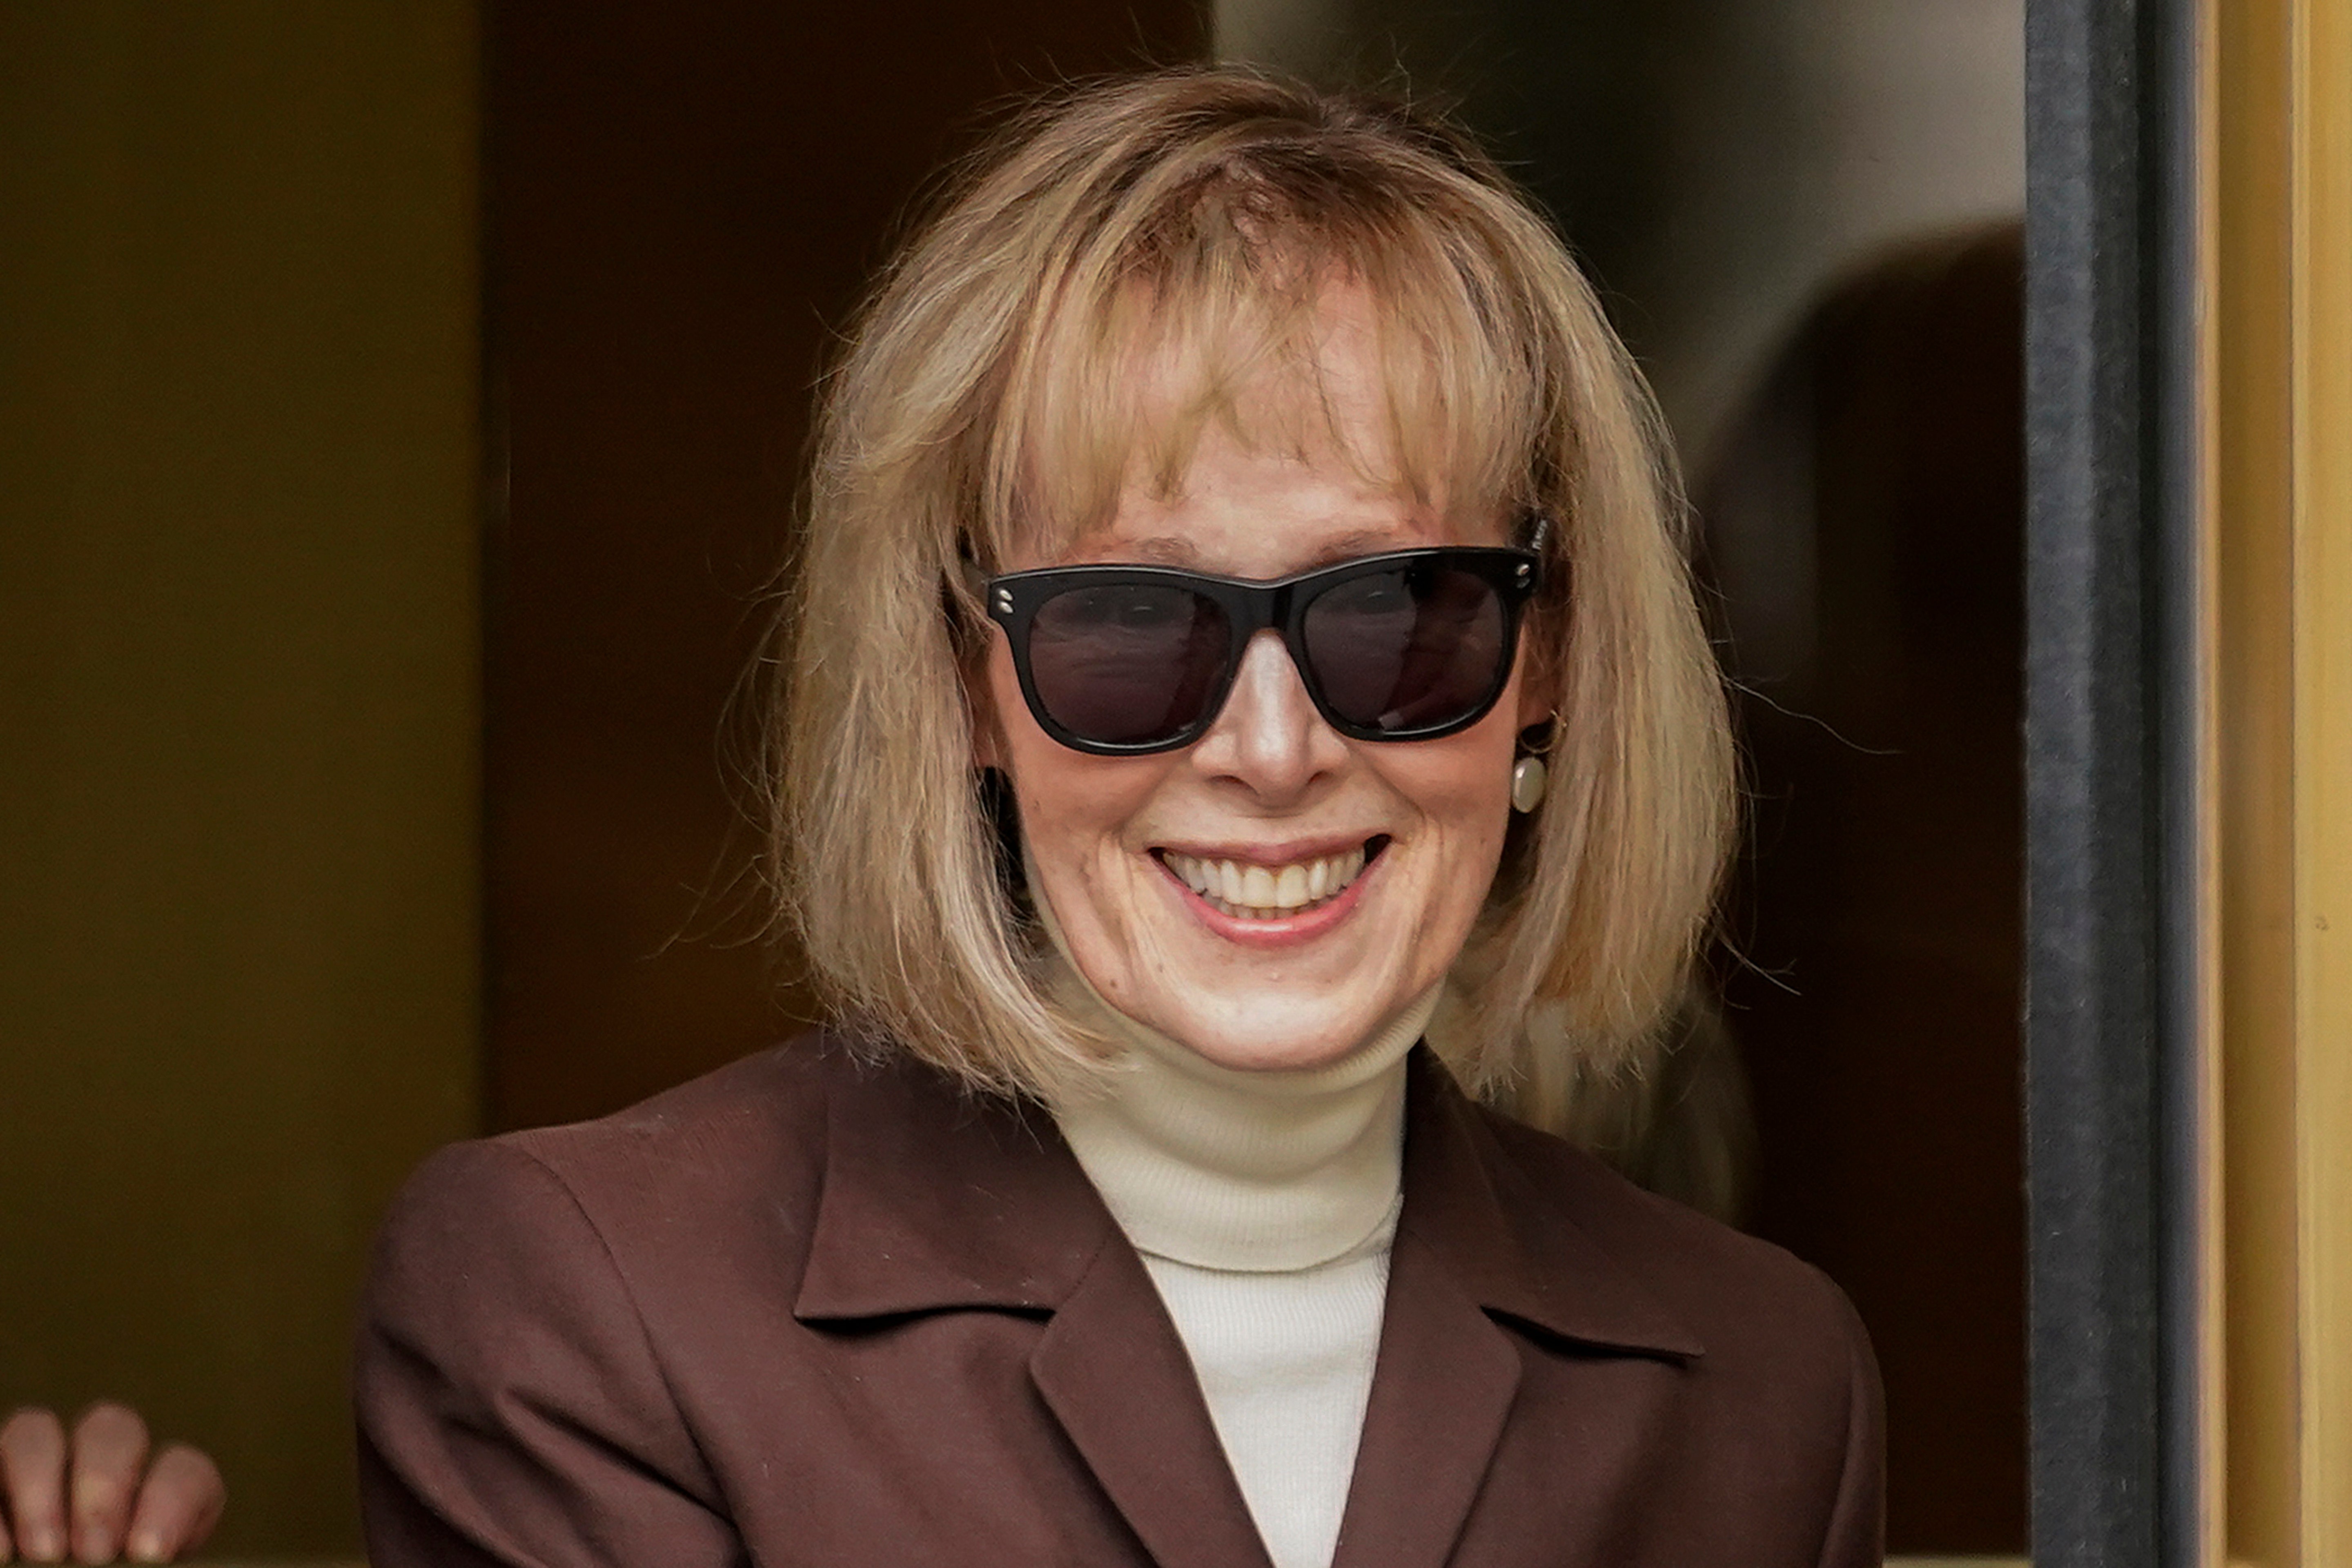 E Jean Carroll leaves a Manhattan court in May after a jury awarded her $5m for a sexual assault committed by Mr Trump